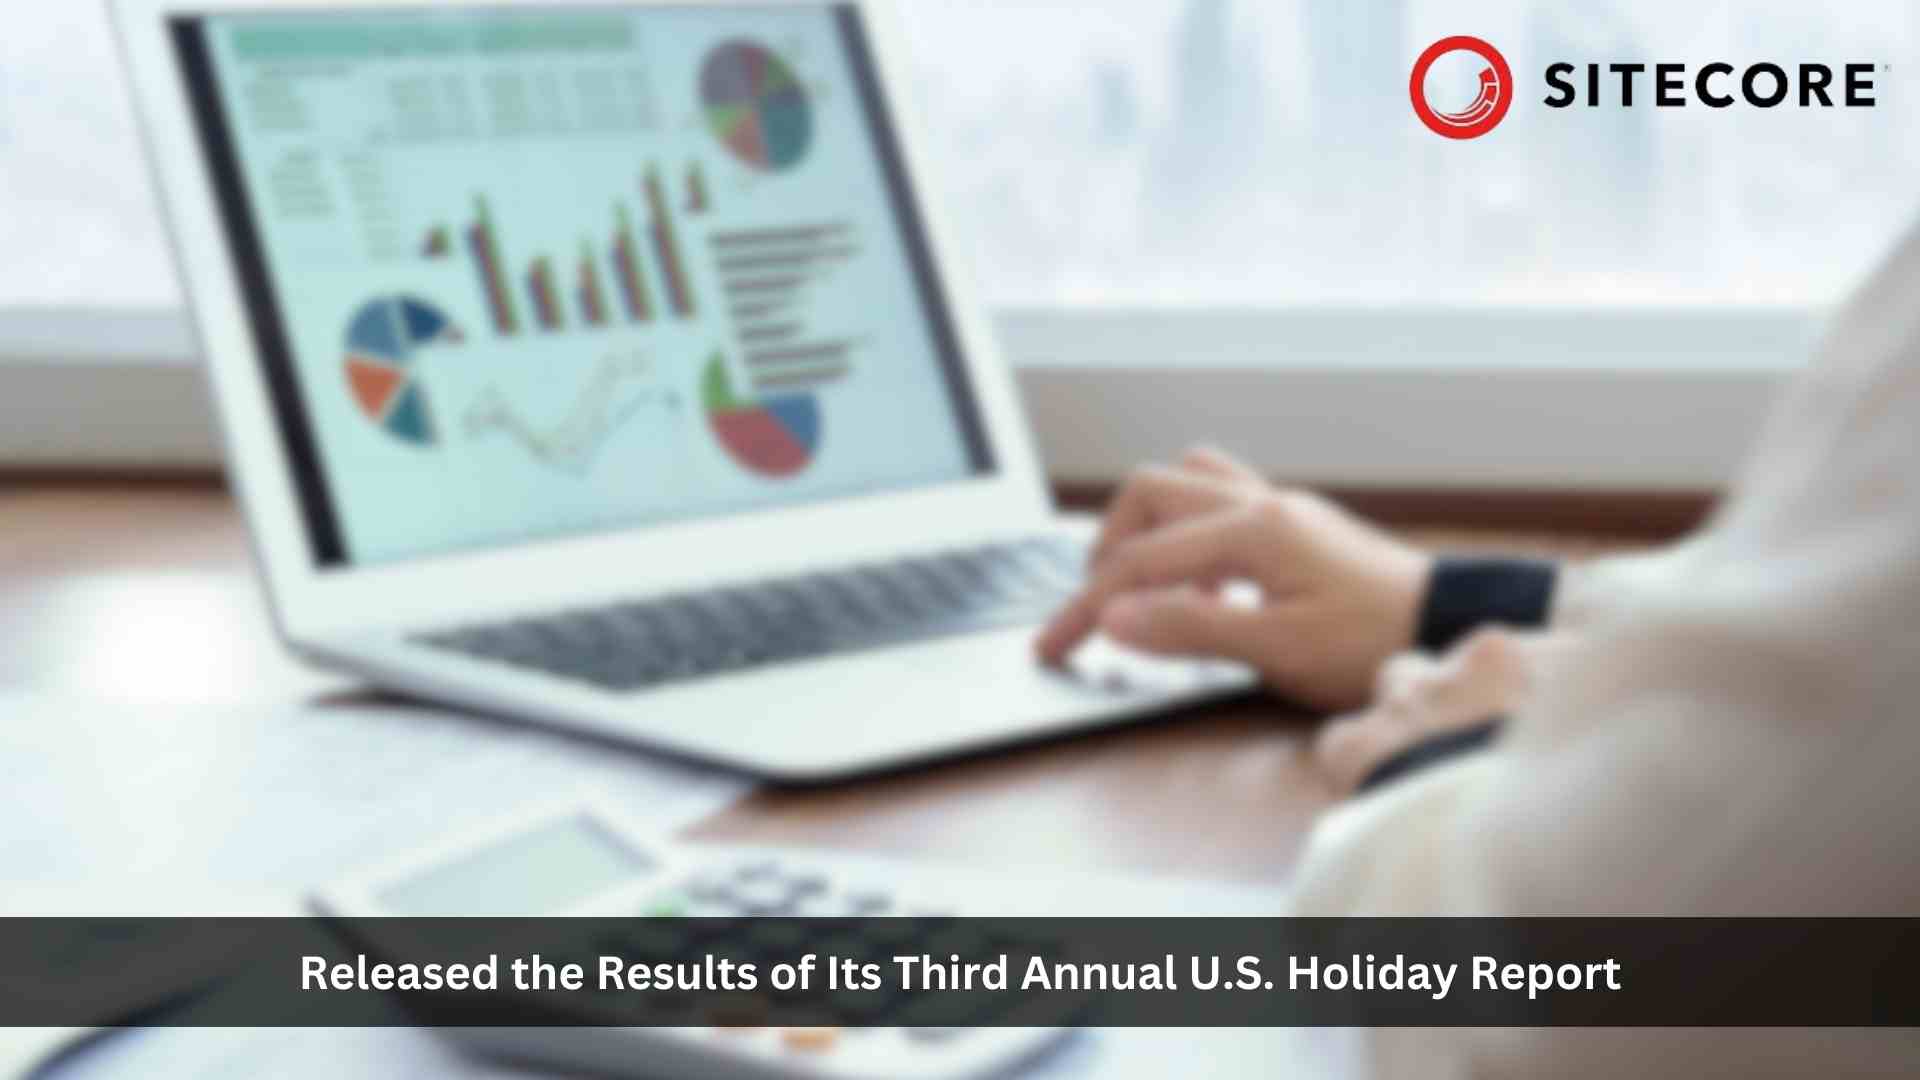 Sitecore 2023 U.S. Holiday Report Reveals How Consumers Will Shop, Spend & Save This Holiday Season